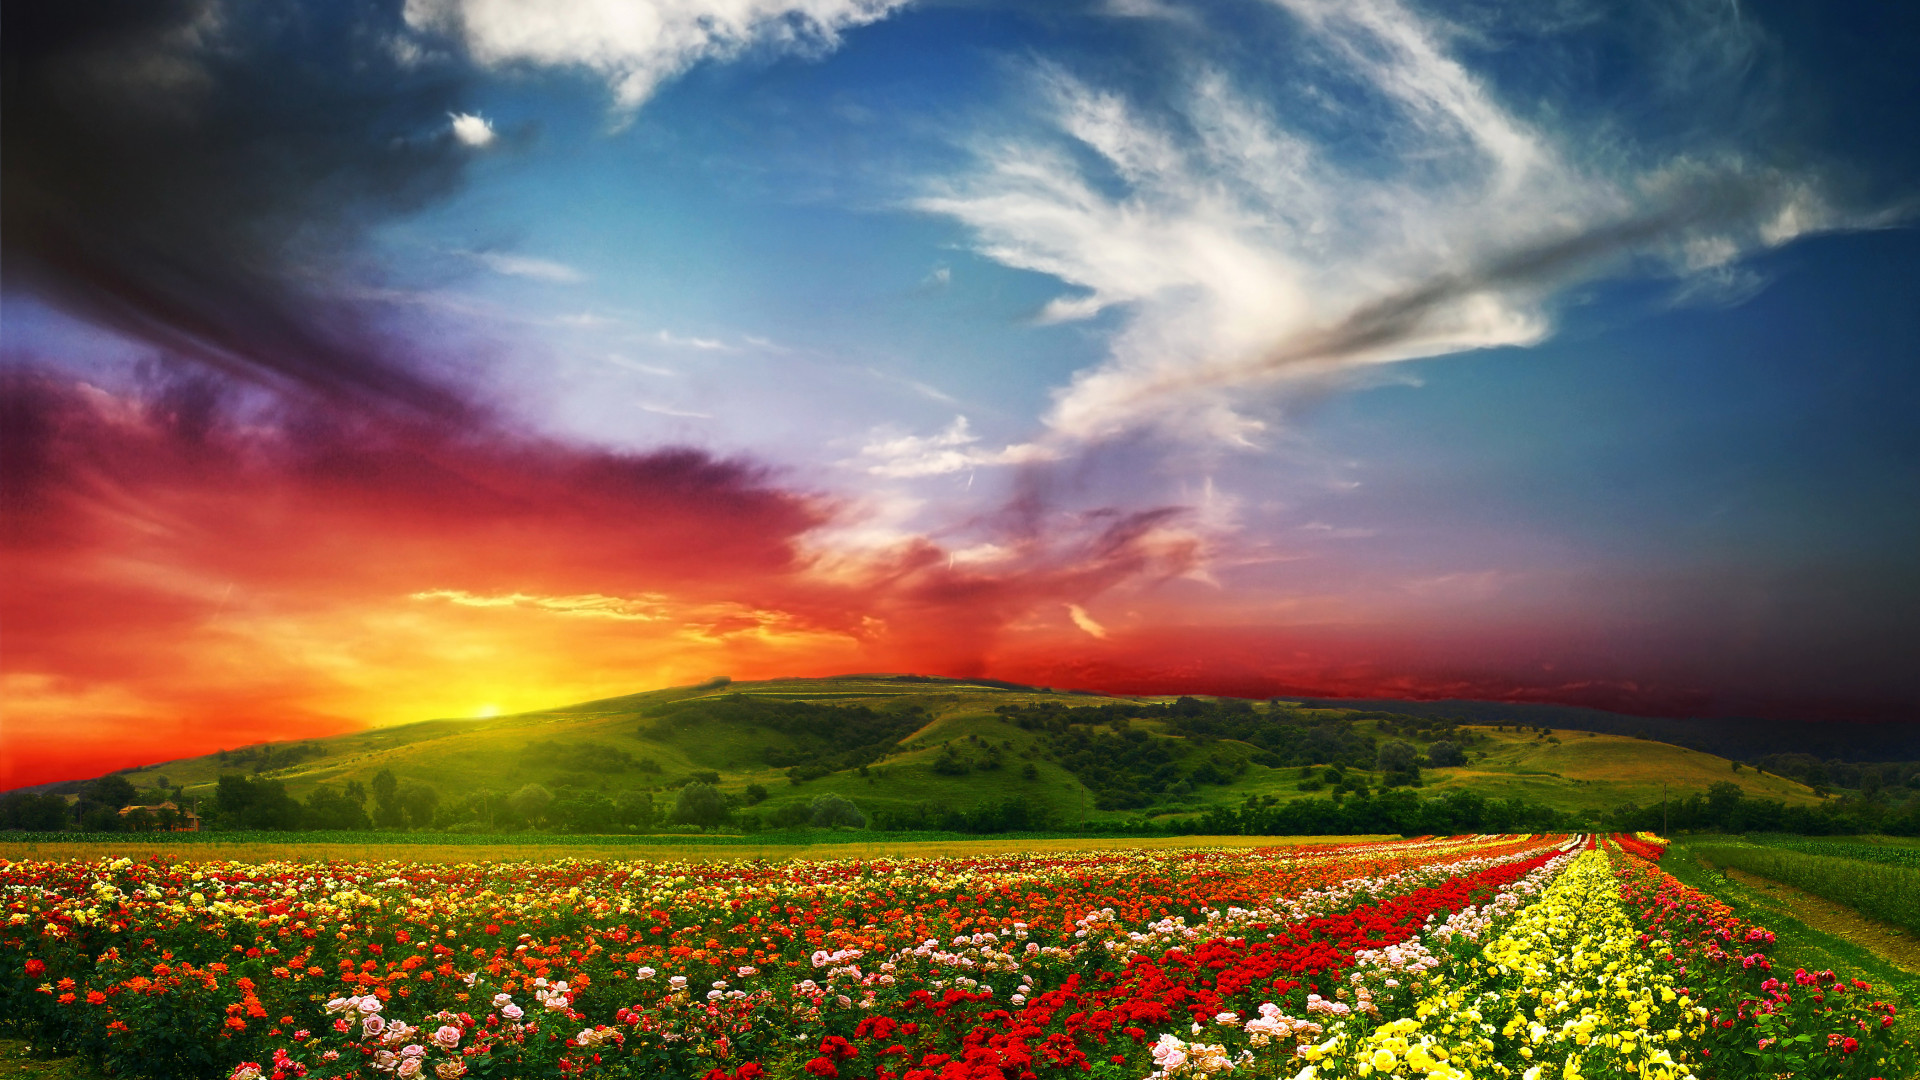 Wallpaper India, 5k, 4k wallpaper, Valley of Flowers, Meadows, roses,  sunset, clouds, Nature #5310